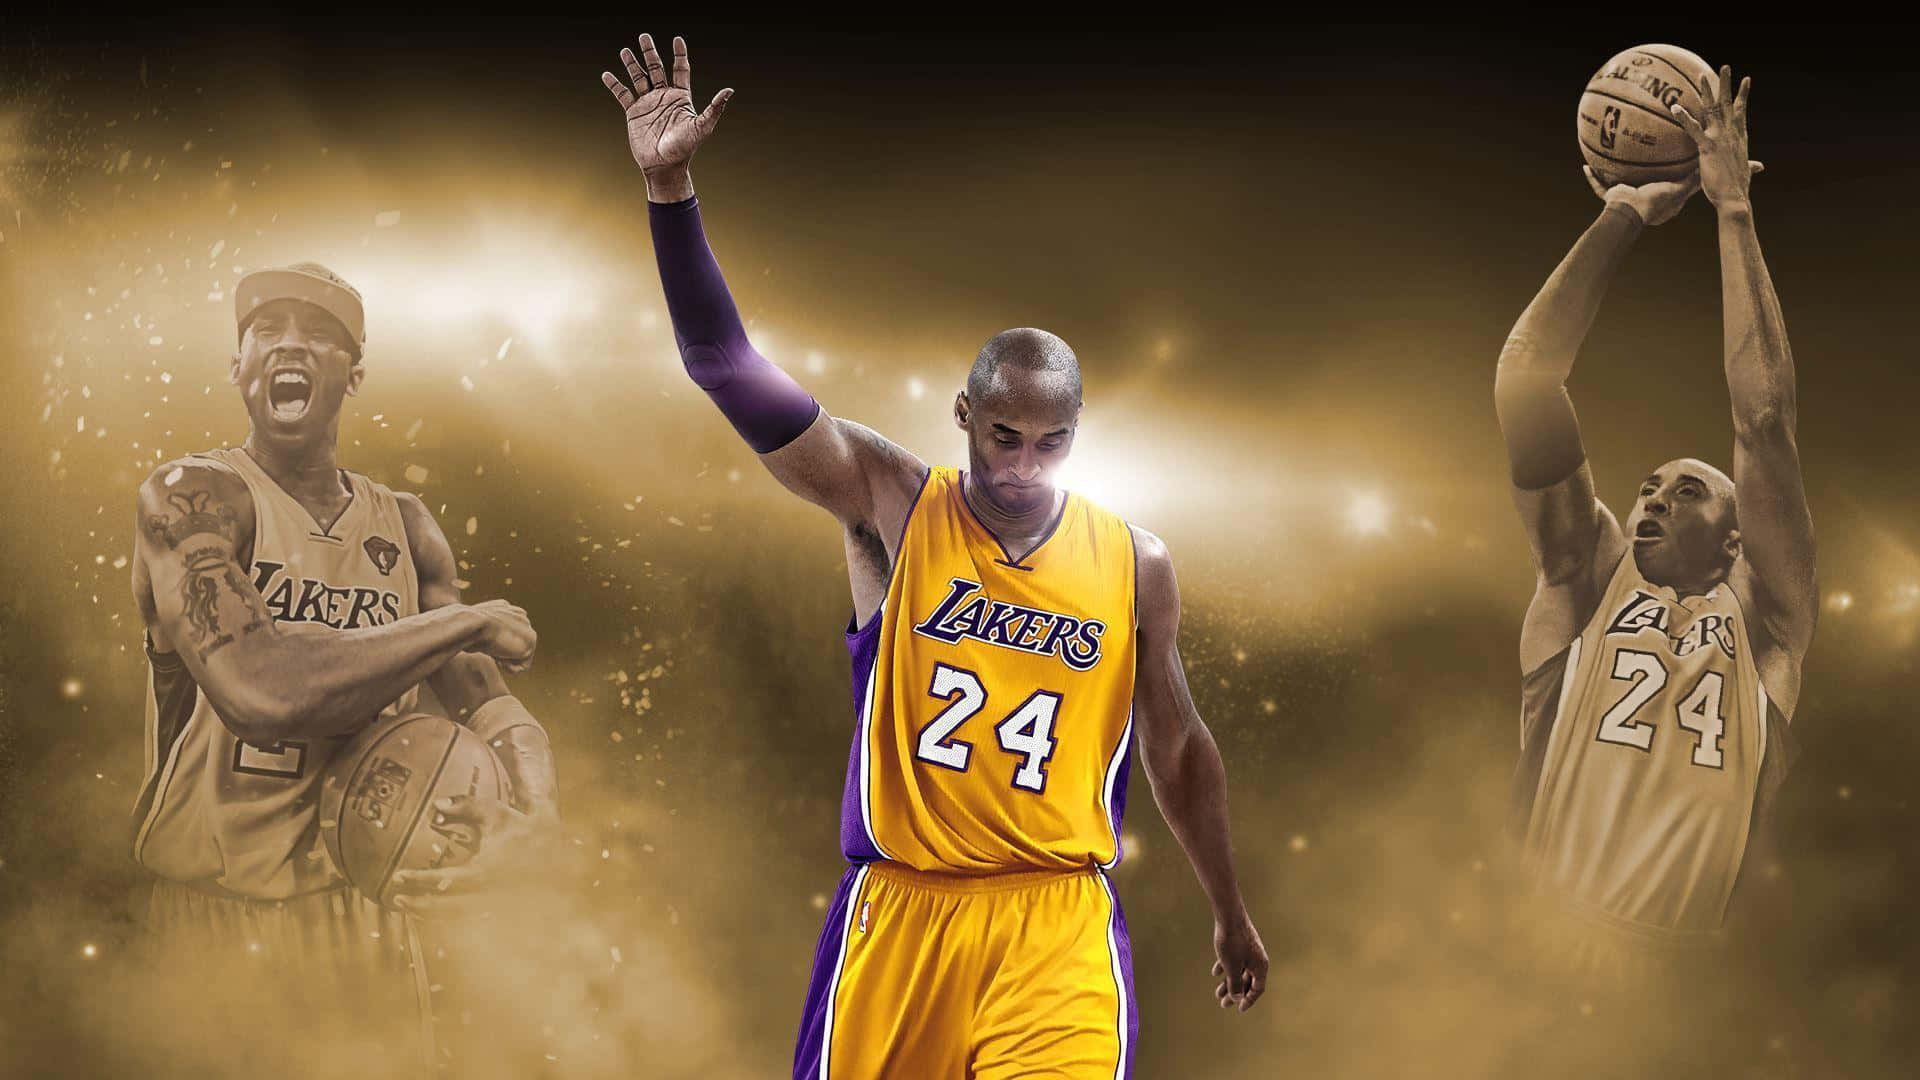 “hit Home With Nba 2k!” Background